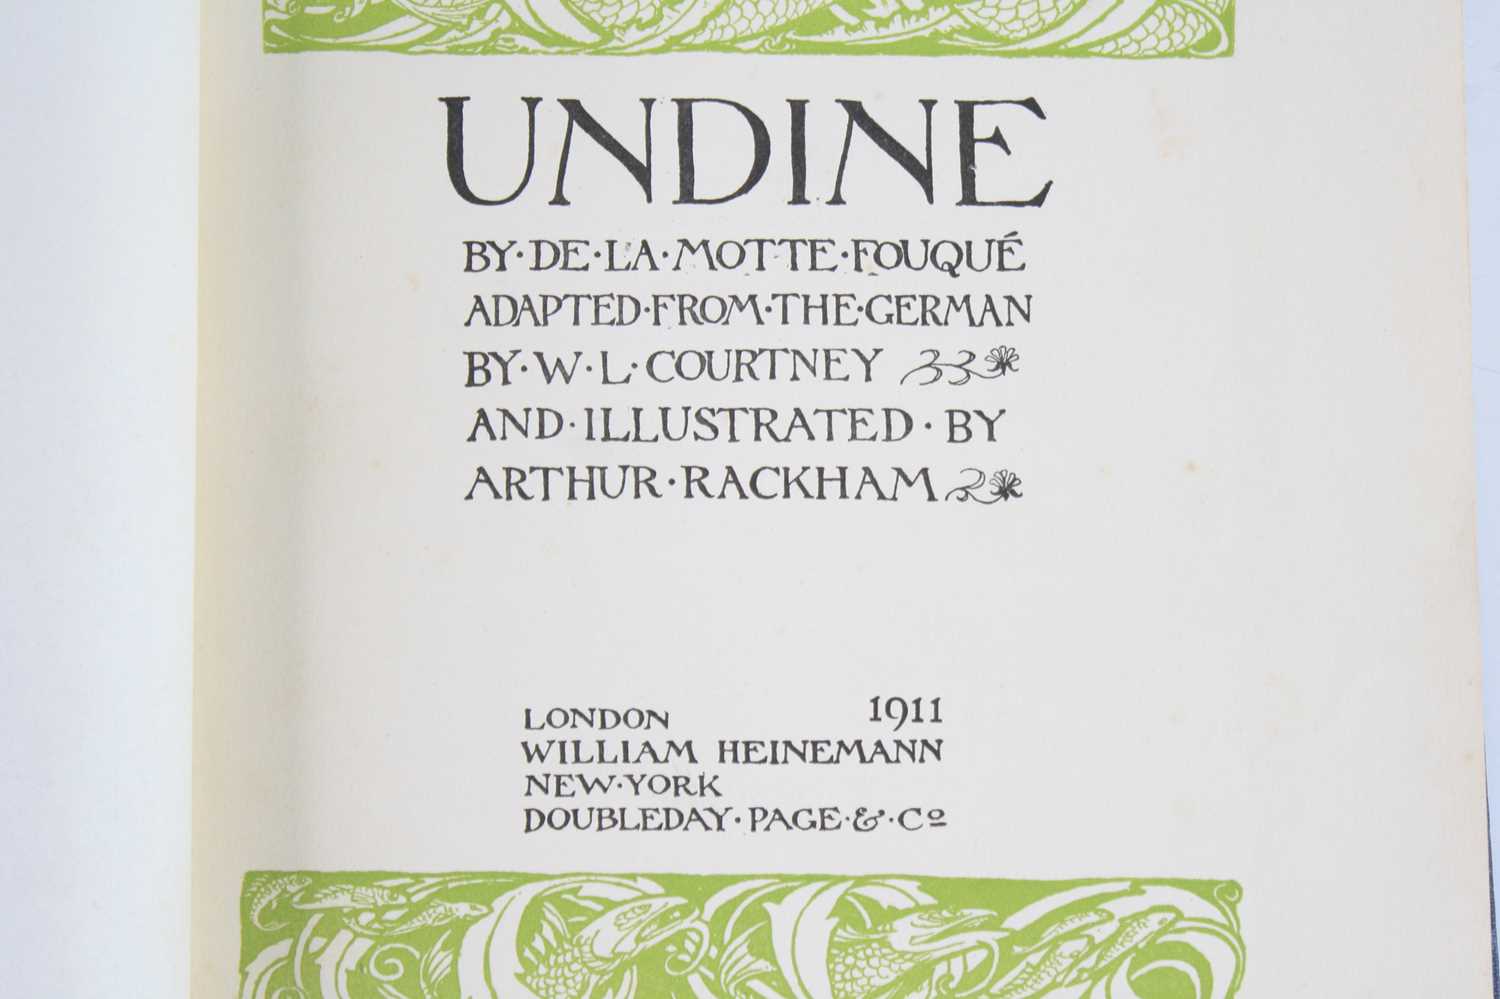 Fouque, De La Motte: Undine, Adapted from the German by W.L. Courtney, Illustrated by Arthur - Image 2 of 3